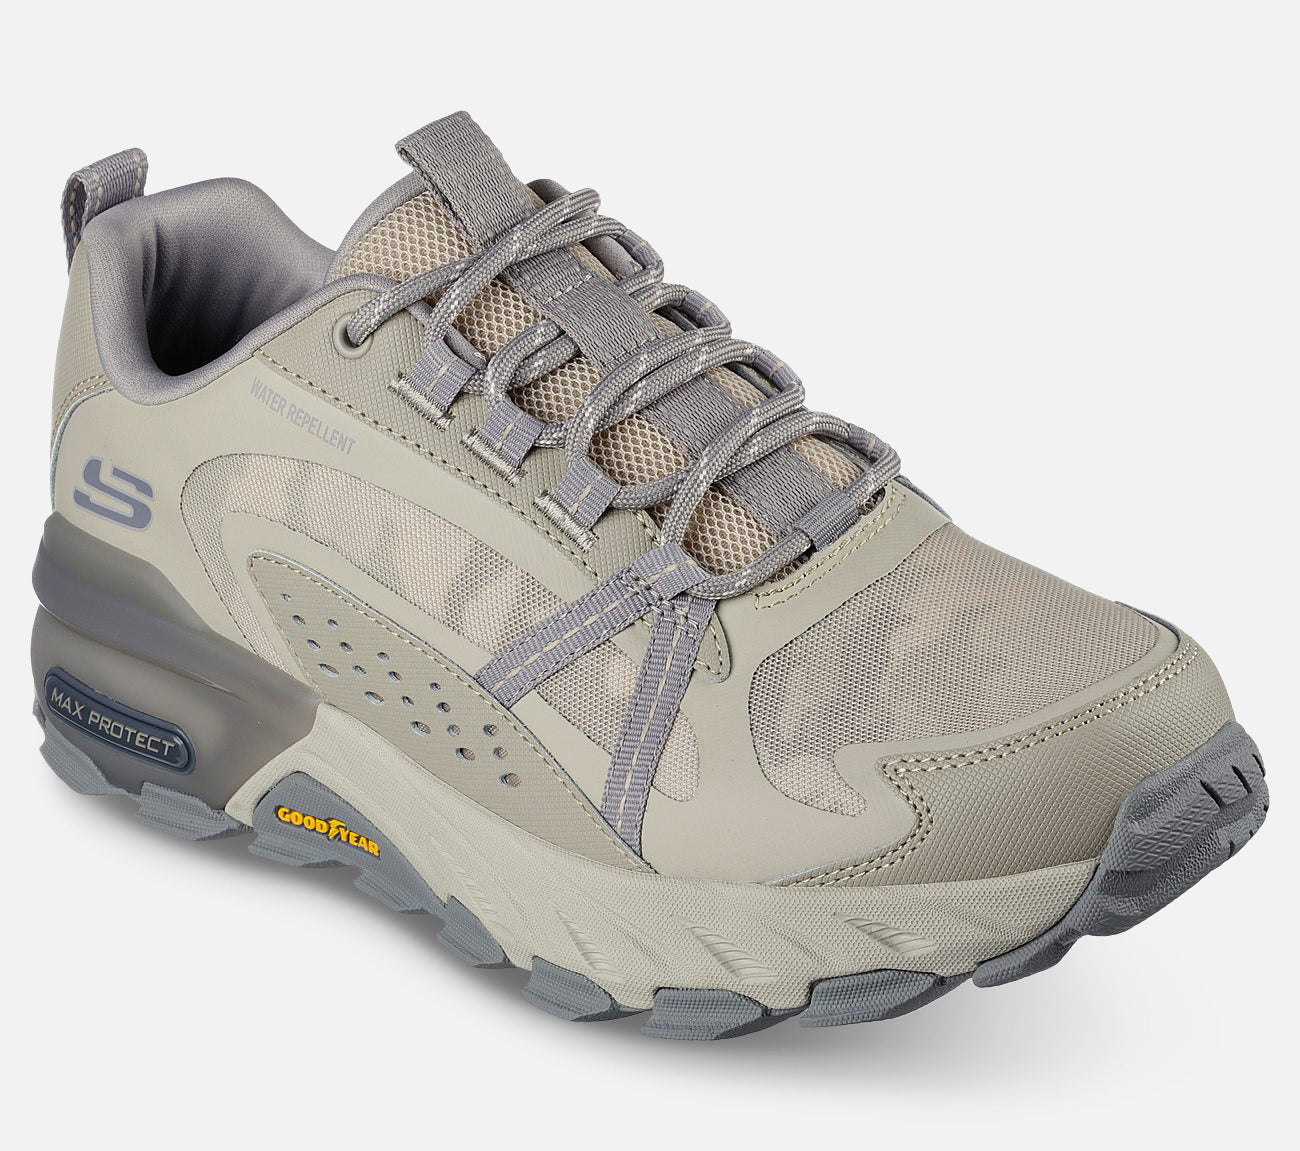 Max Protect - Task Force - Water Repellent Shoe Skechers